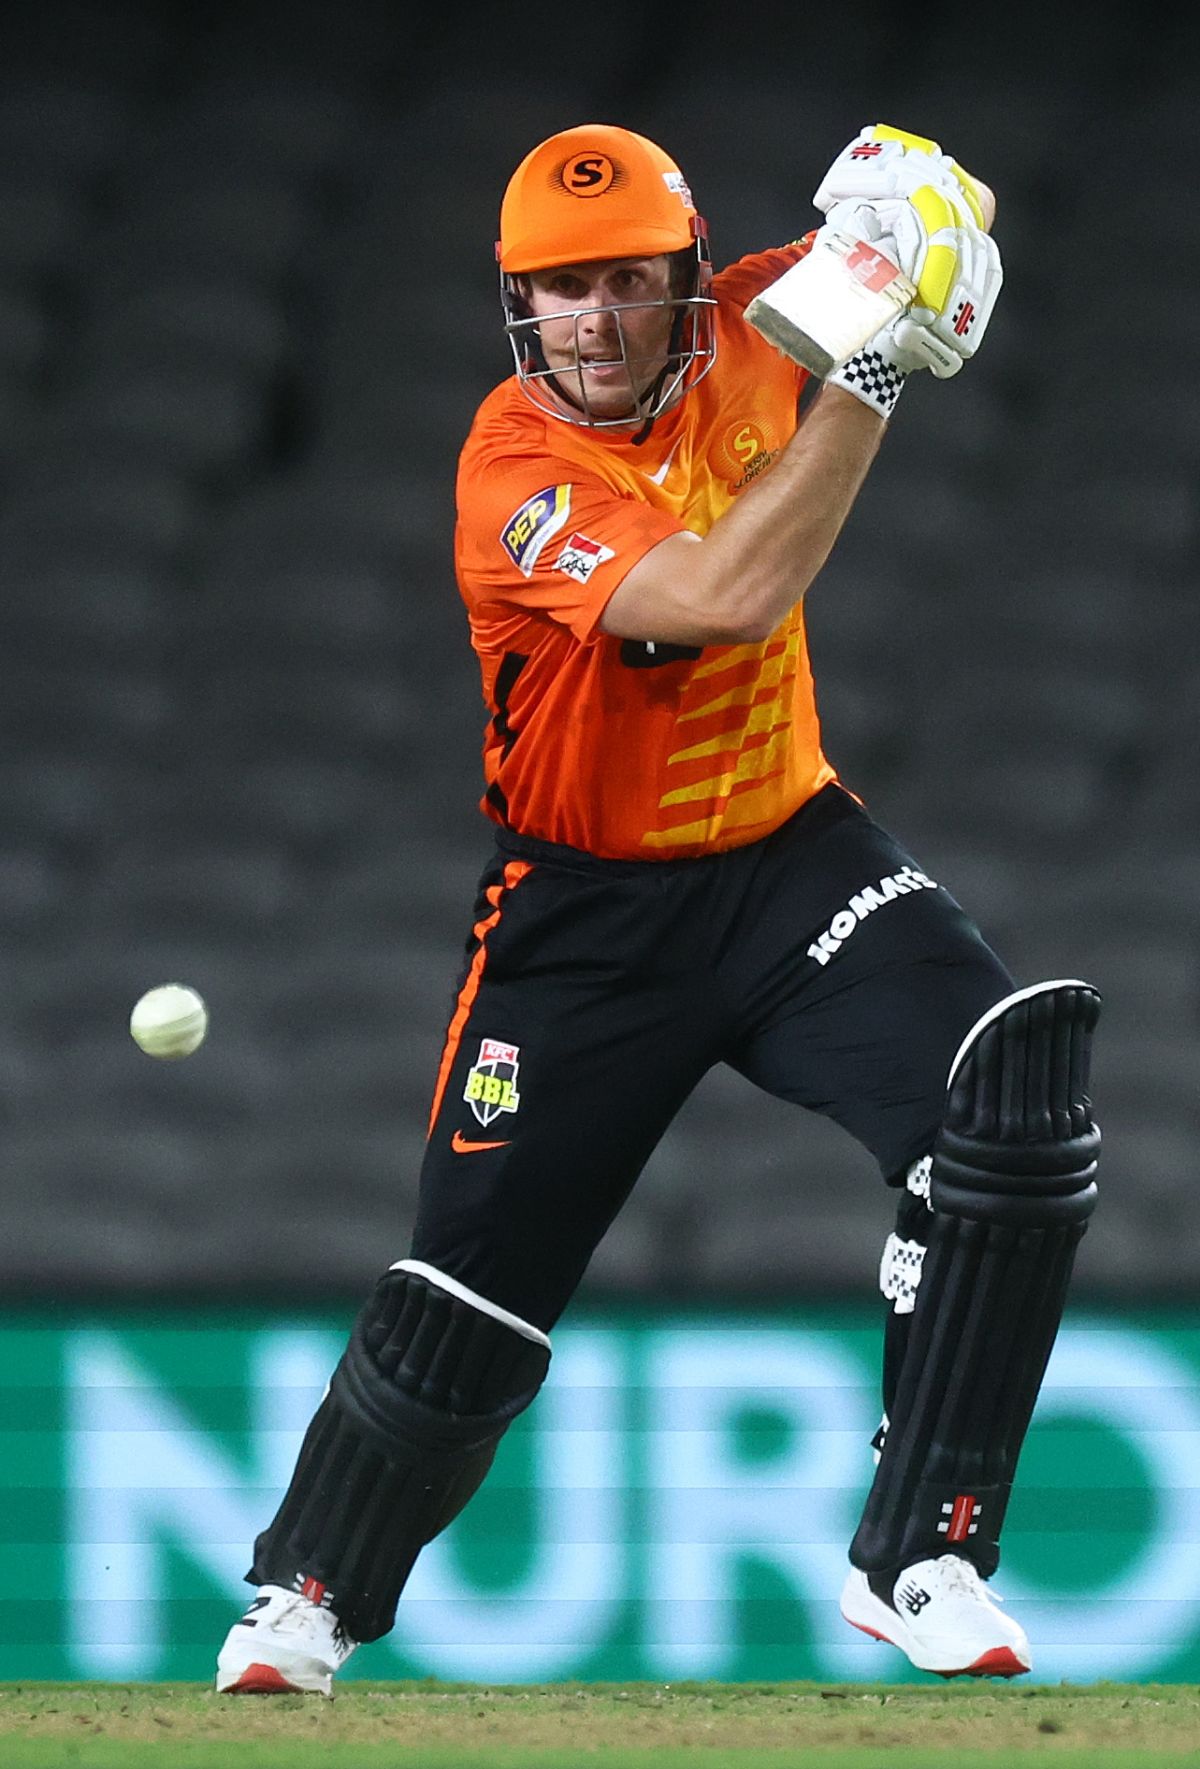 Mitchell Marsh cracks one towards the cover during his 34-ball 59, Brisbane Heat vs Perth Scorchers, BBL 2021-22, Melbourne, January 17, 2022